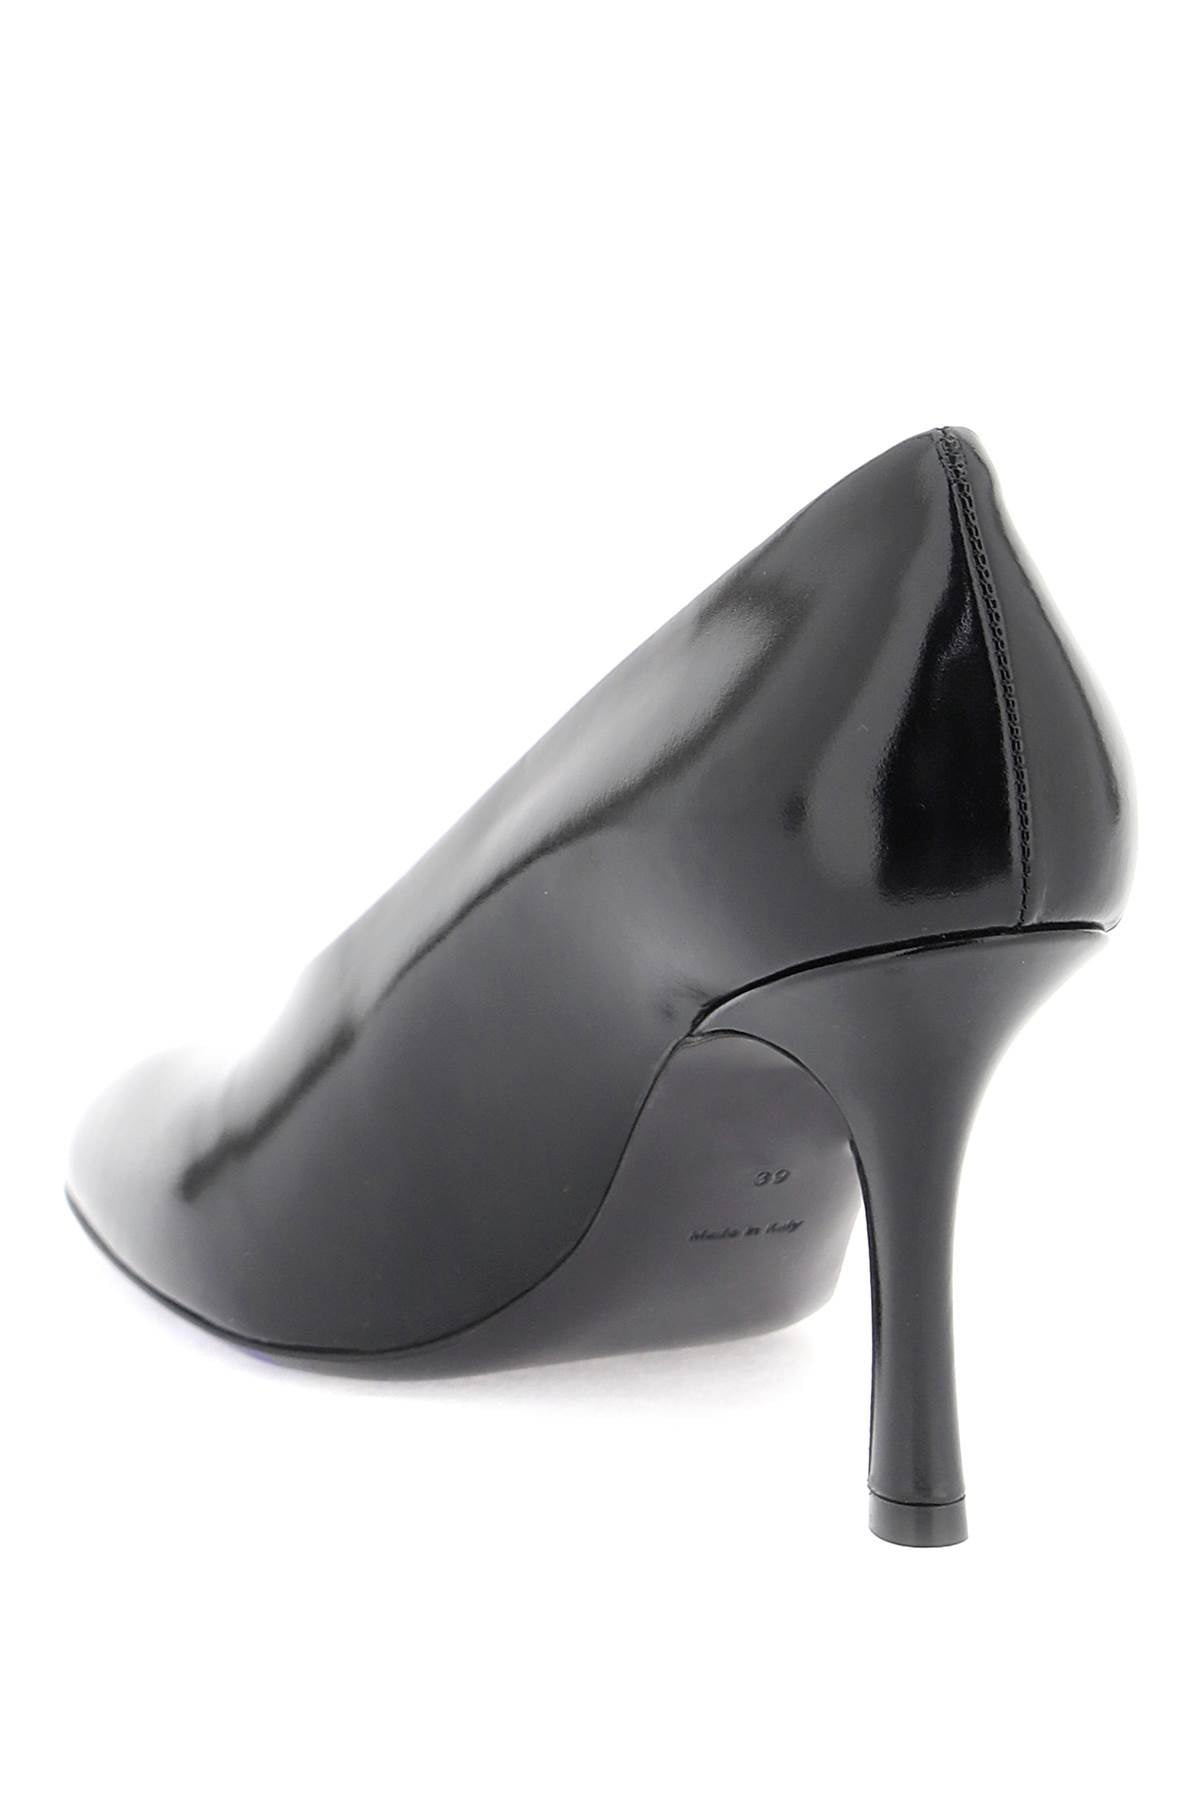 Shop Burberry Polished Leather Women's Shiny Heeled Pumps In Black